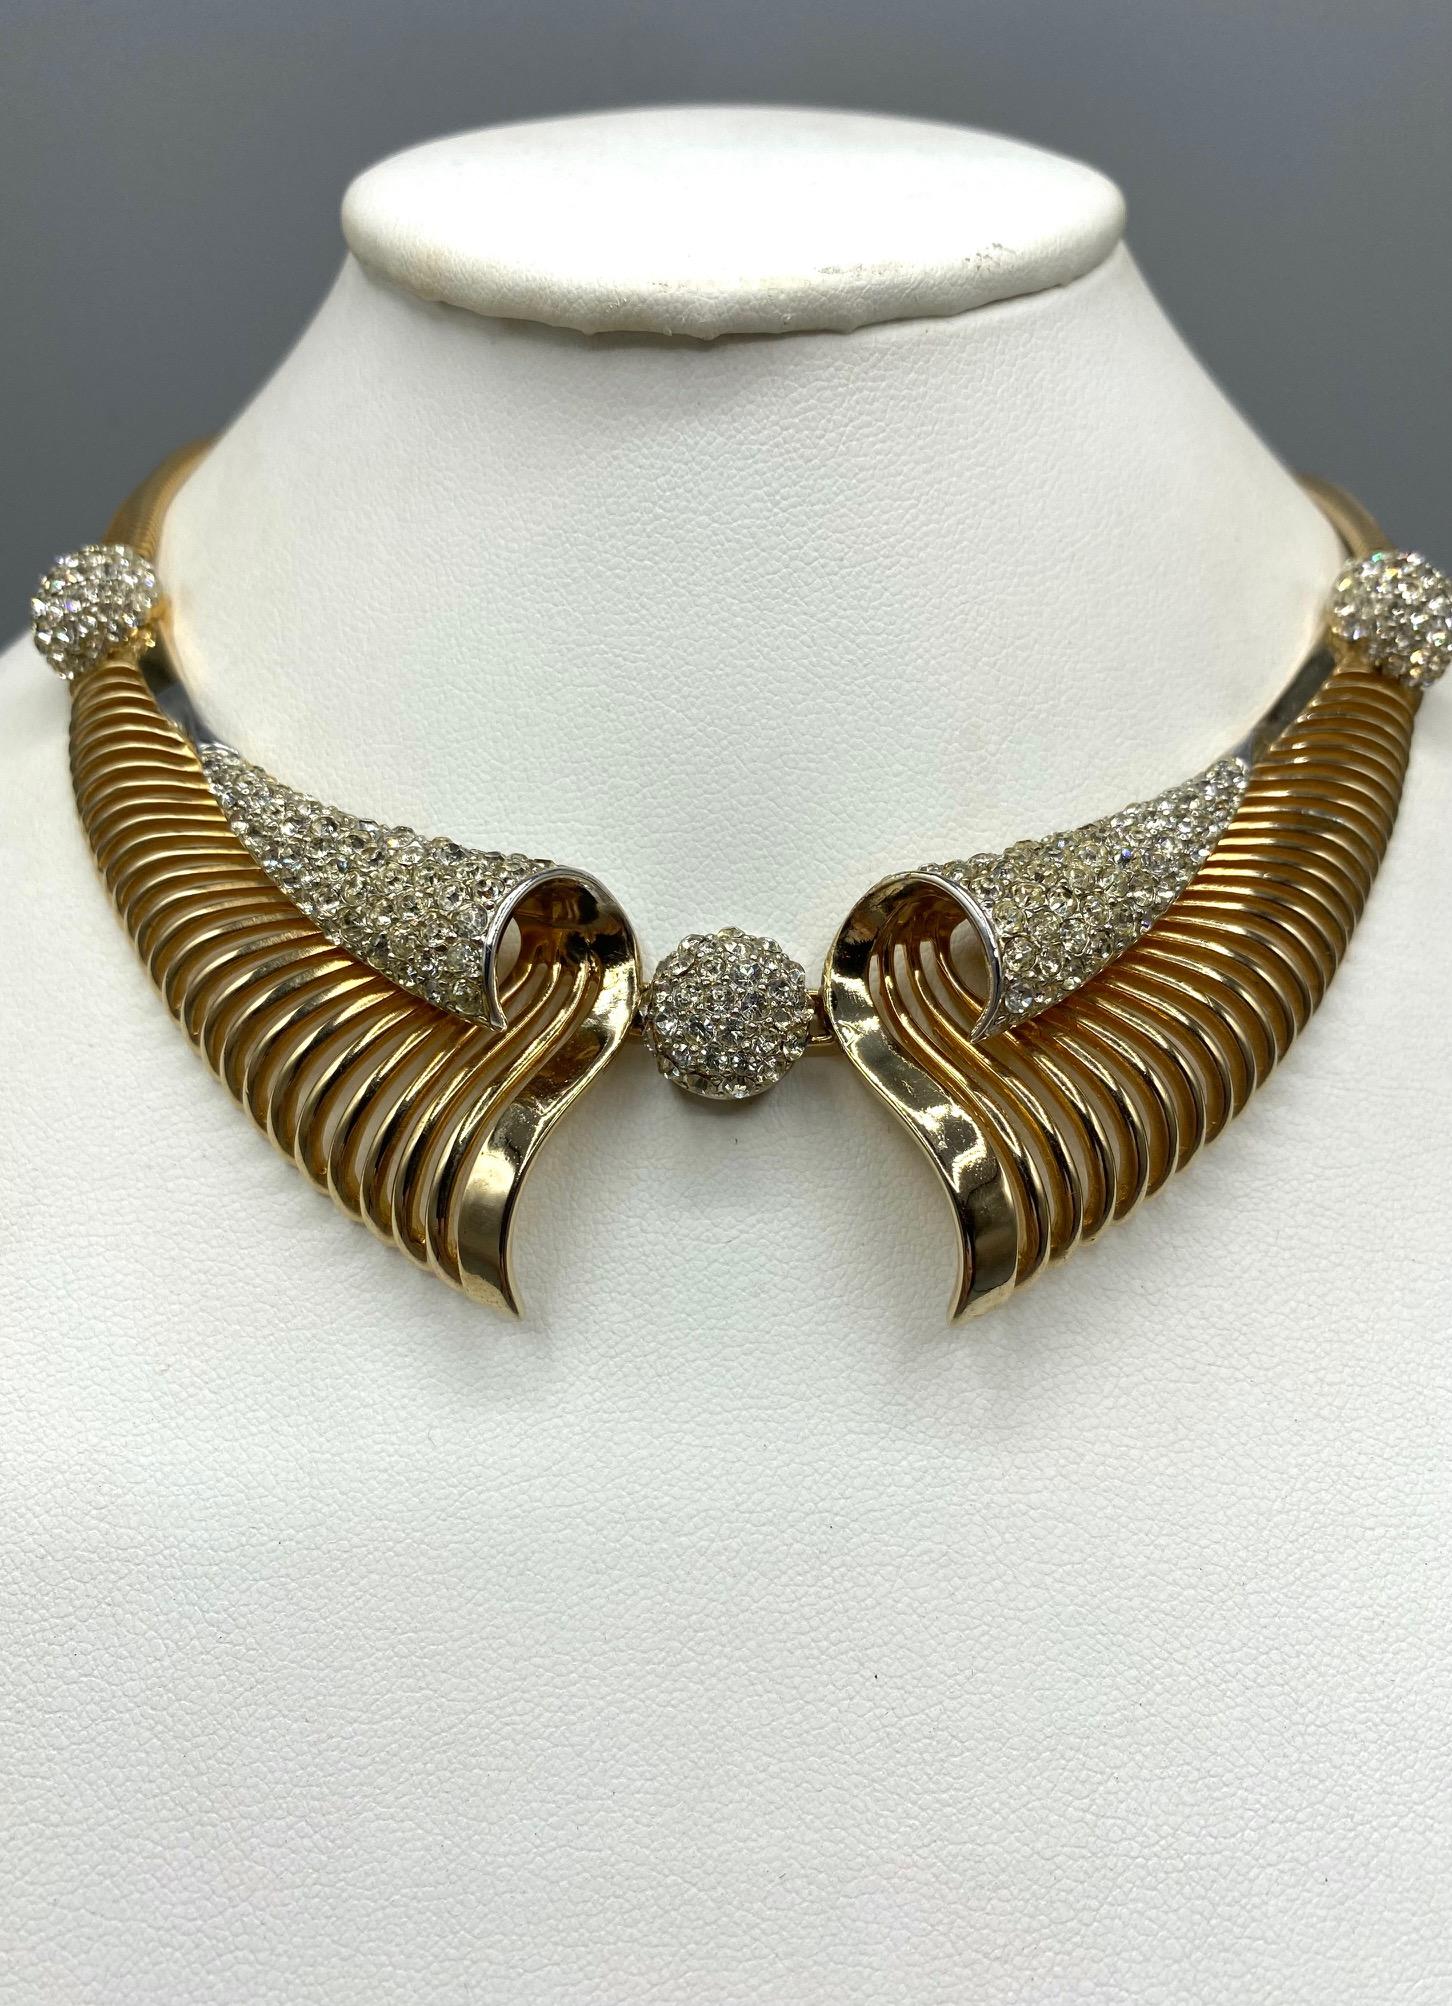 Marcel Boucher 1950s Scroll Collar Necklace 9